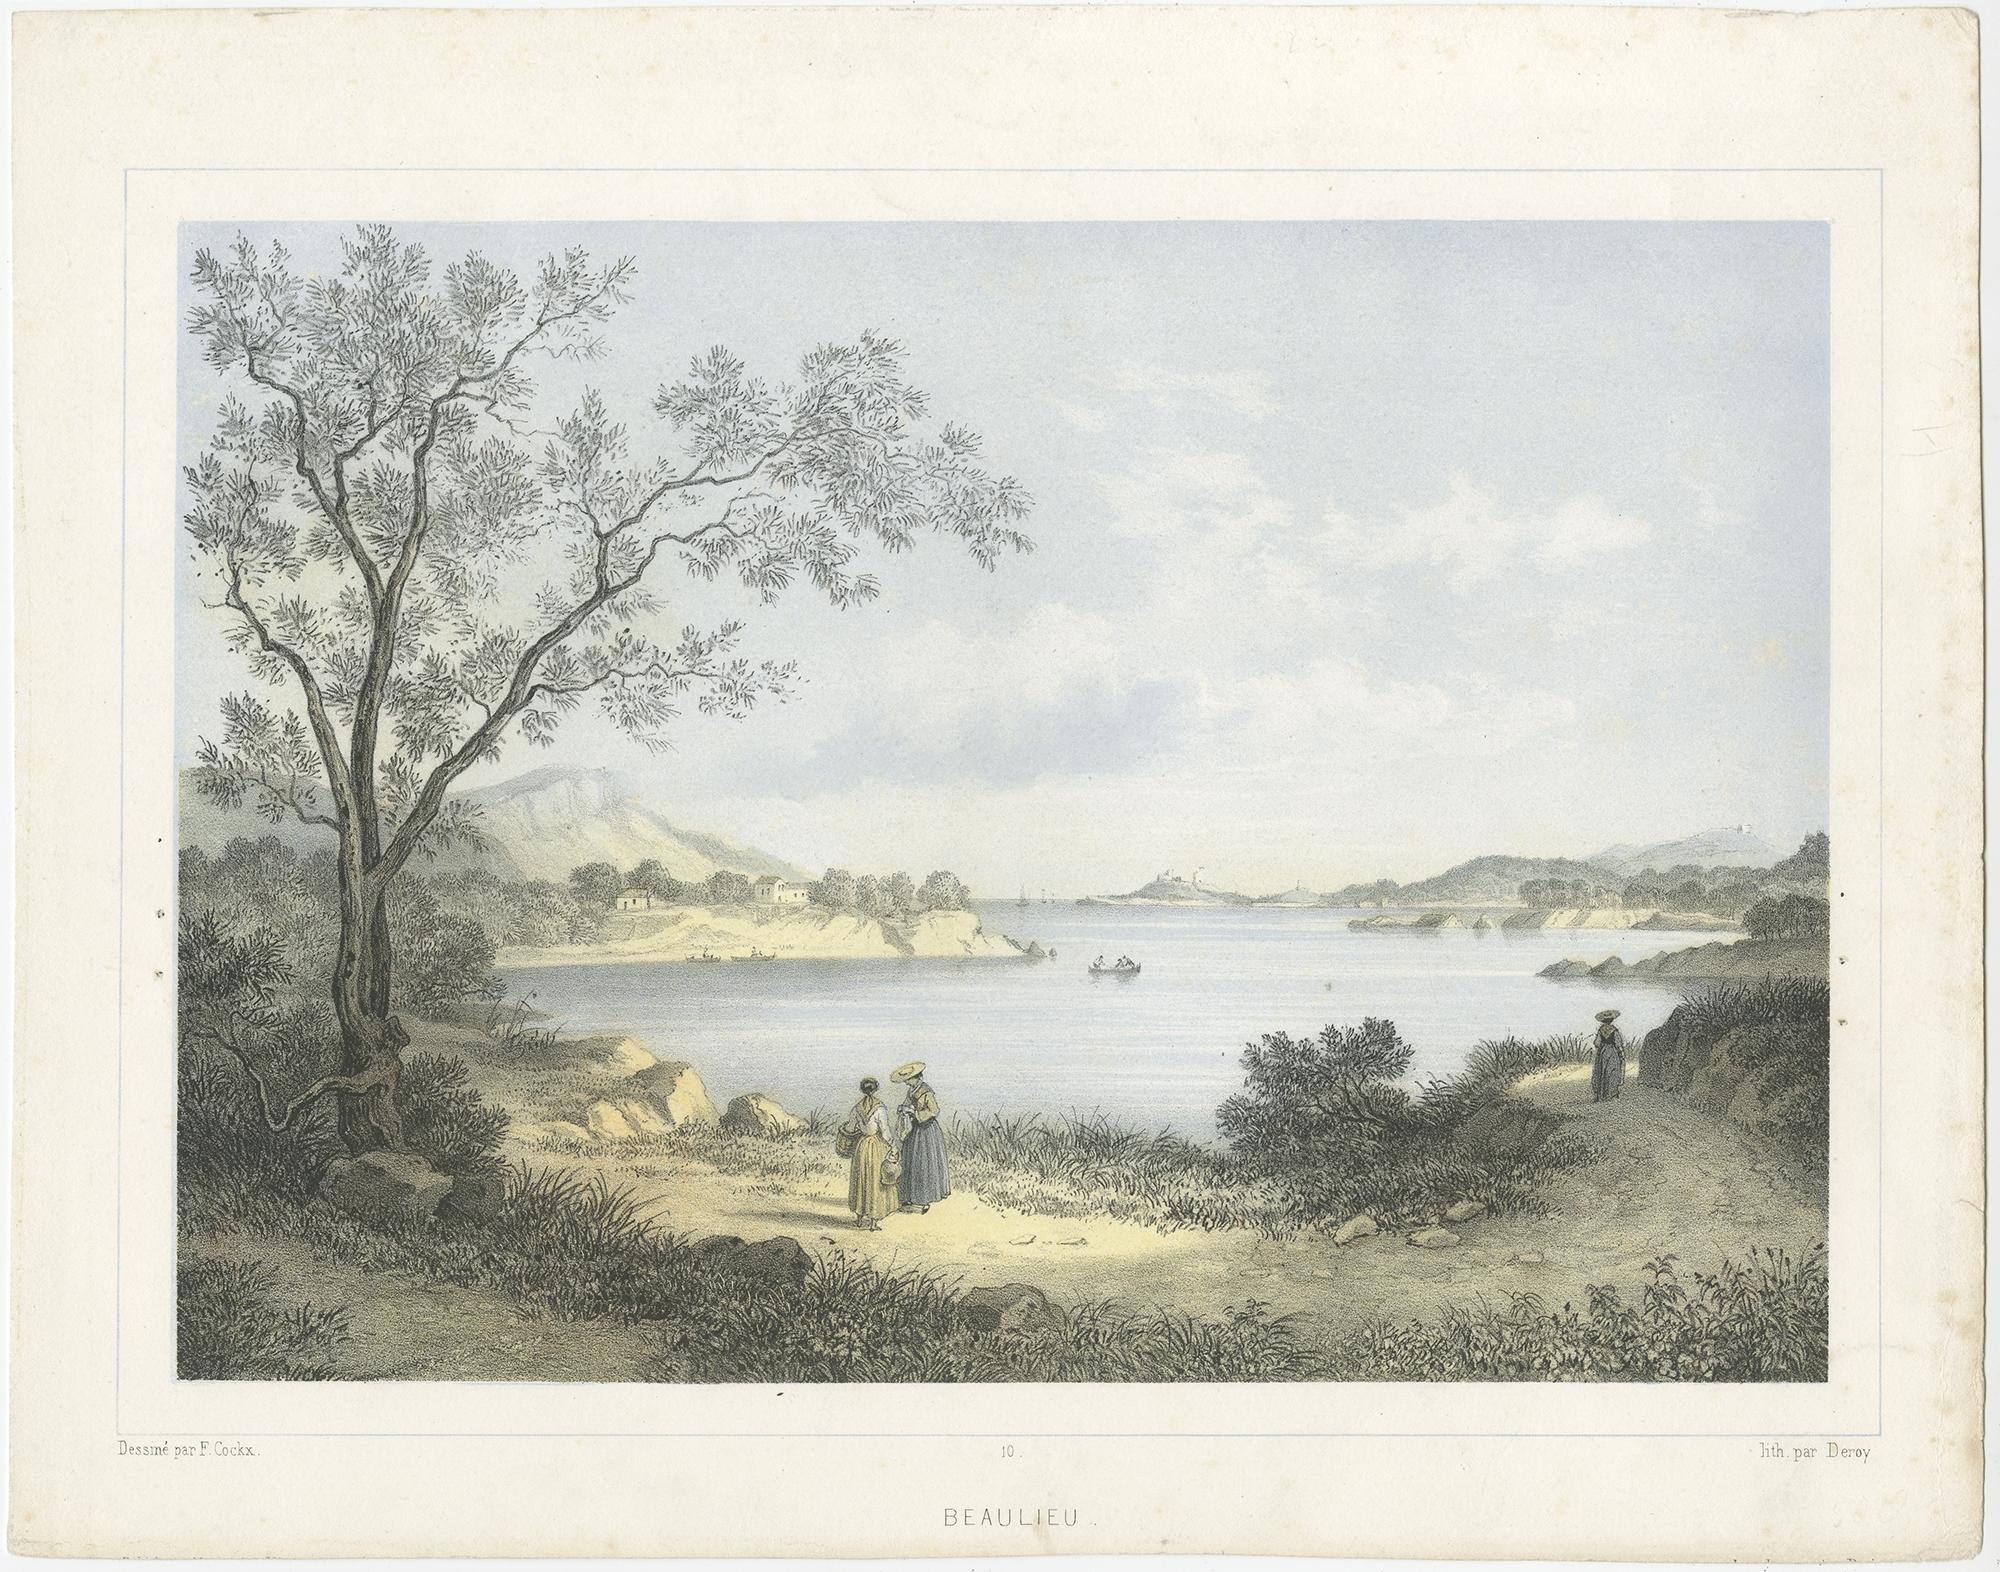 Description: Antique print titled 'Beaulieu'. 

View of Beaulieu-sur-Mer, a seaside village on the French Riviera between Nice and Monaco, France. Source unknown, to be determined.

Artists and Engravers: Engraved by Deroy after F. Cockx.